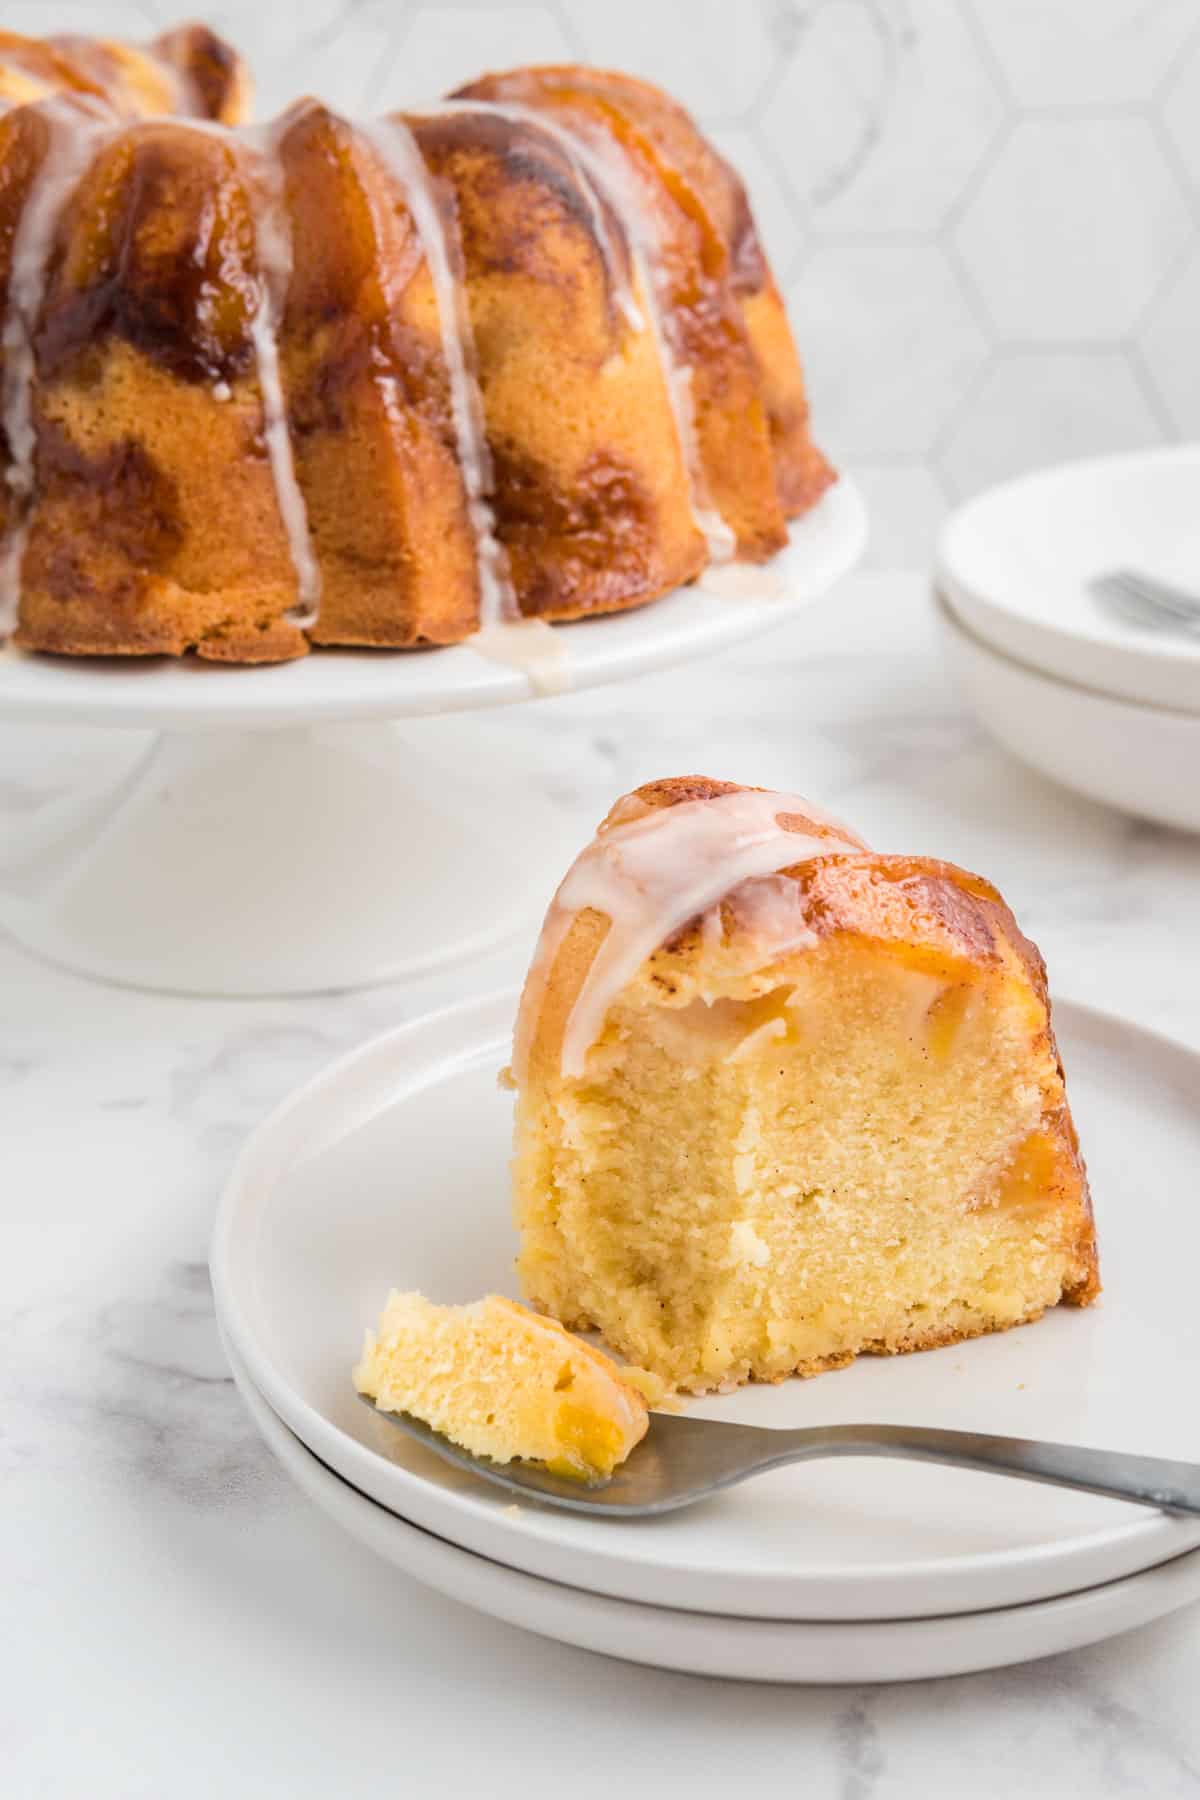 A slice of peach cobbler pound cake on a stack of white plates.